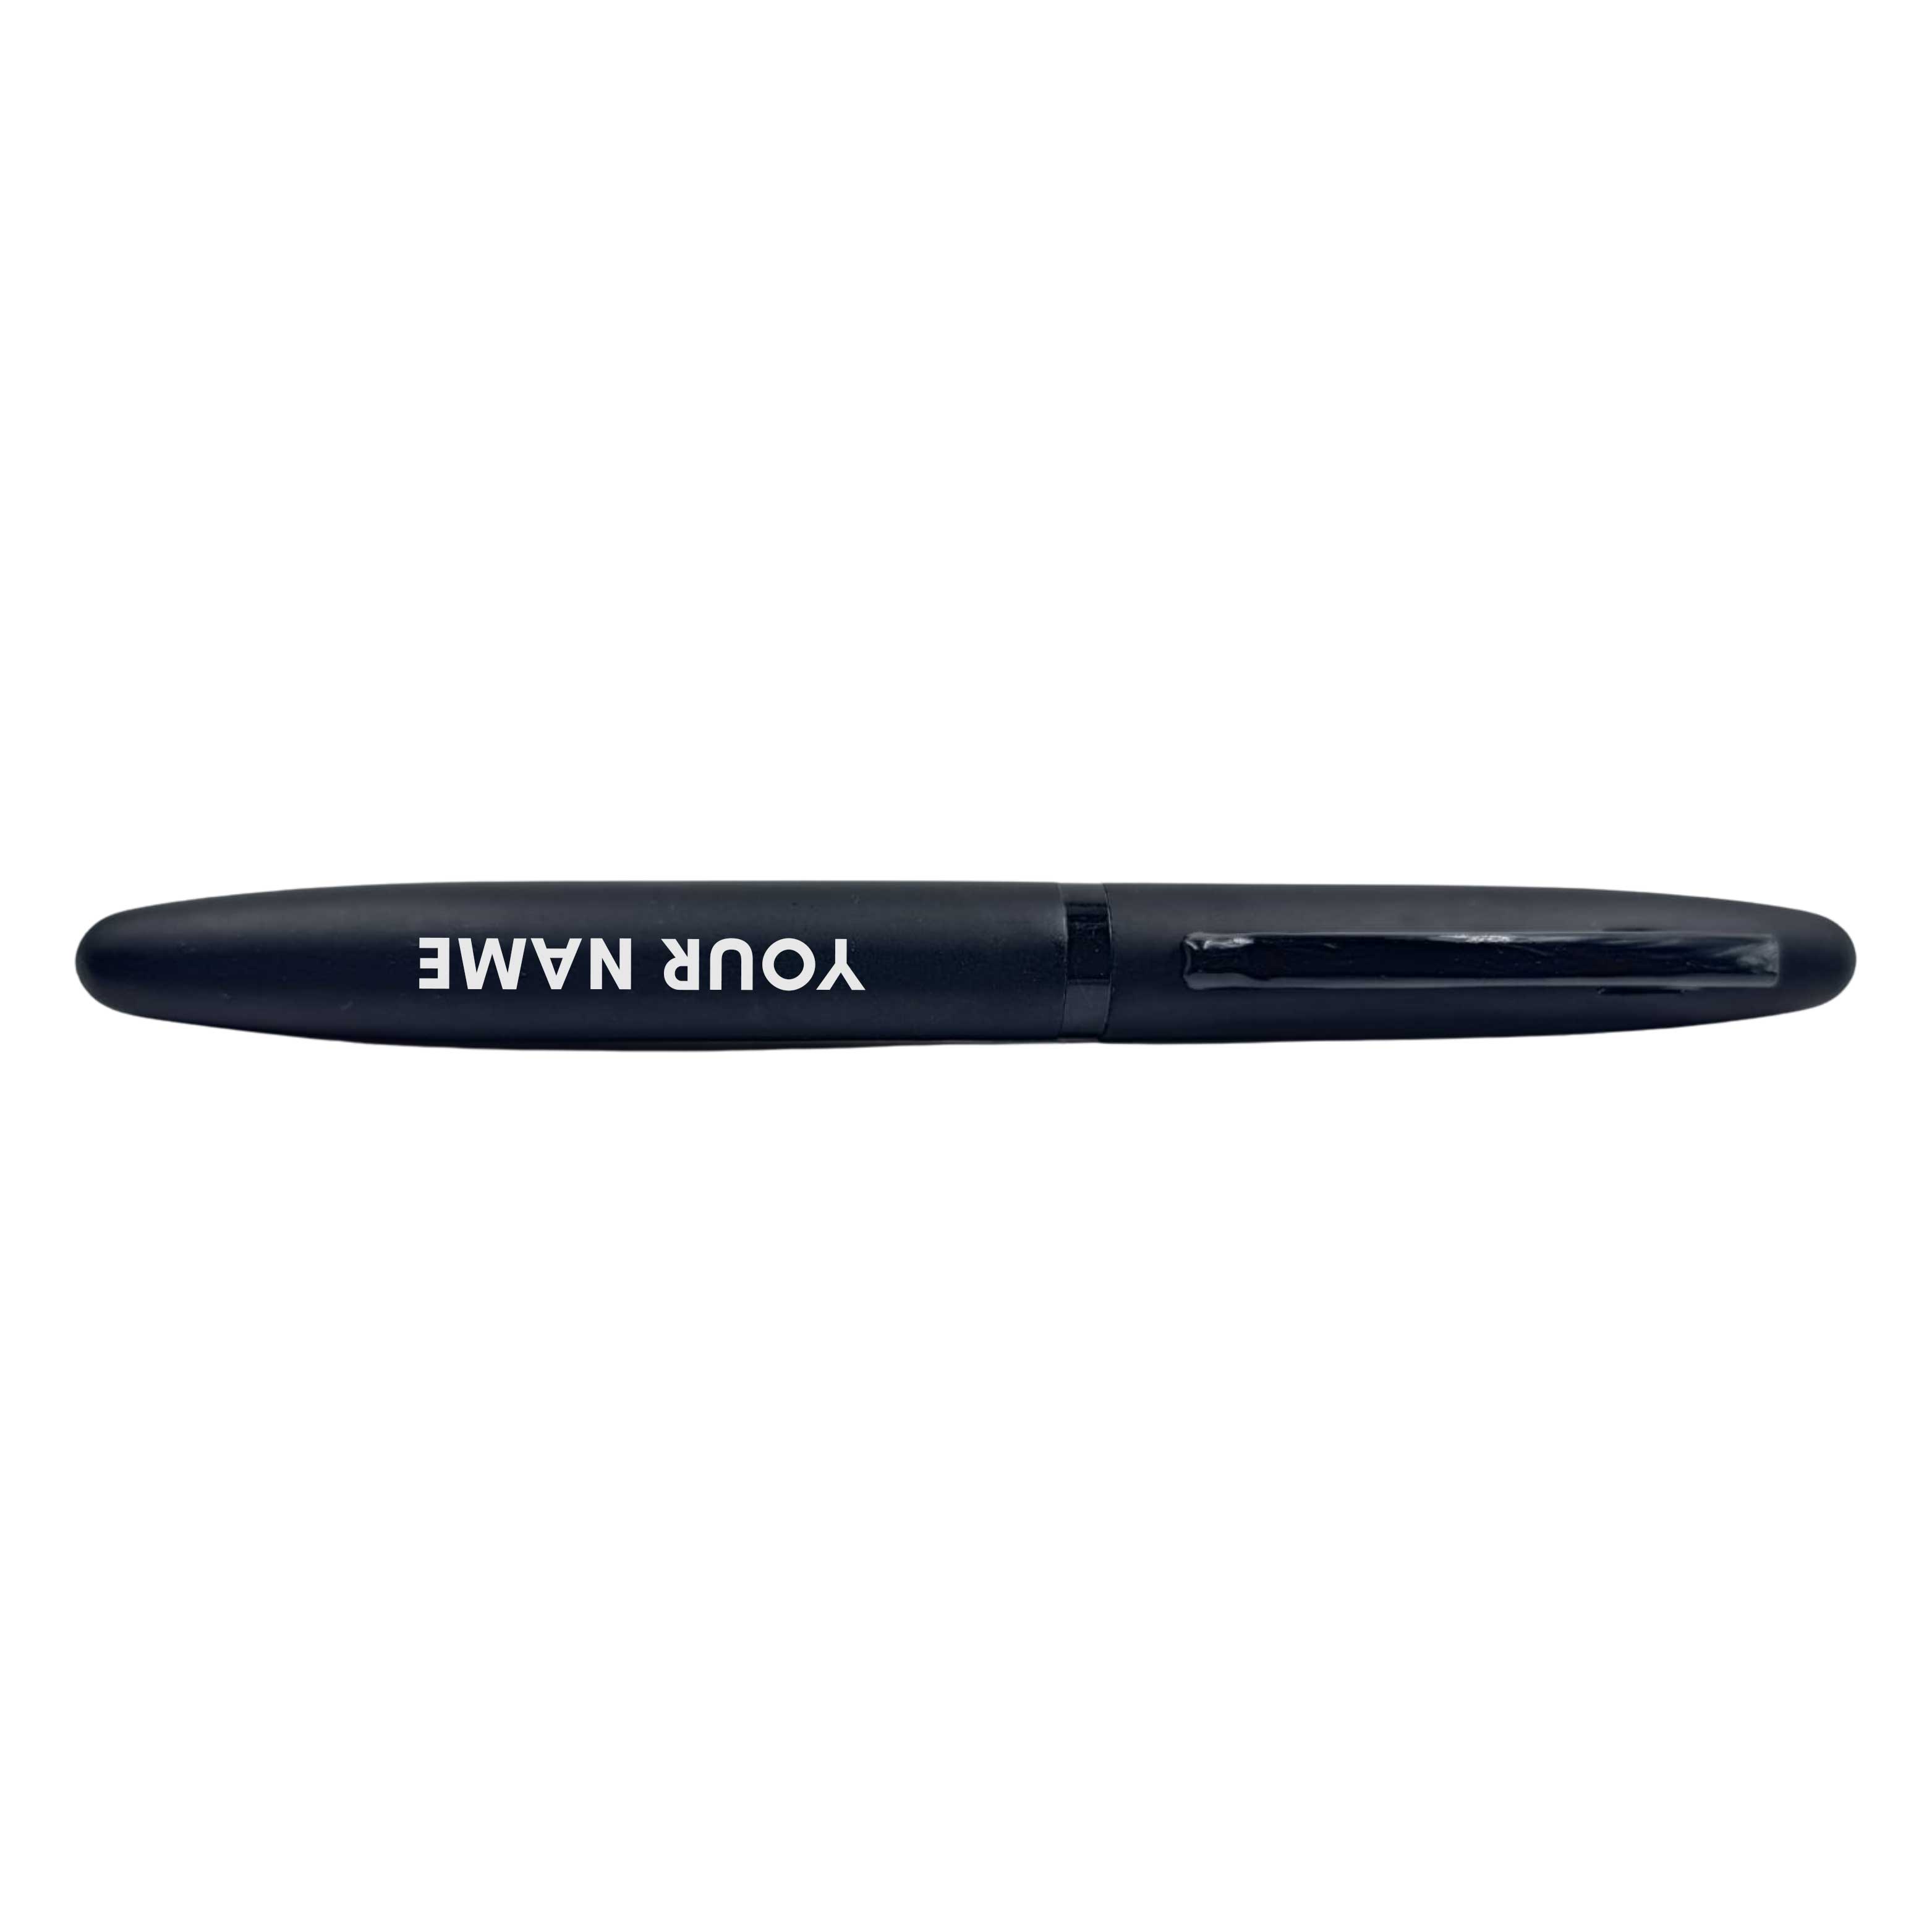 Buy Kk Crosi Name Written Pen For Gift Black Body Color Ball Pen Online In  India At Discounted Prices